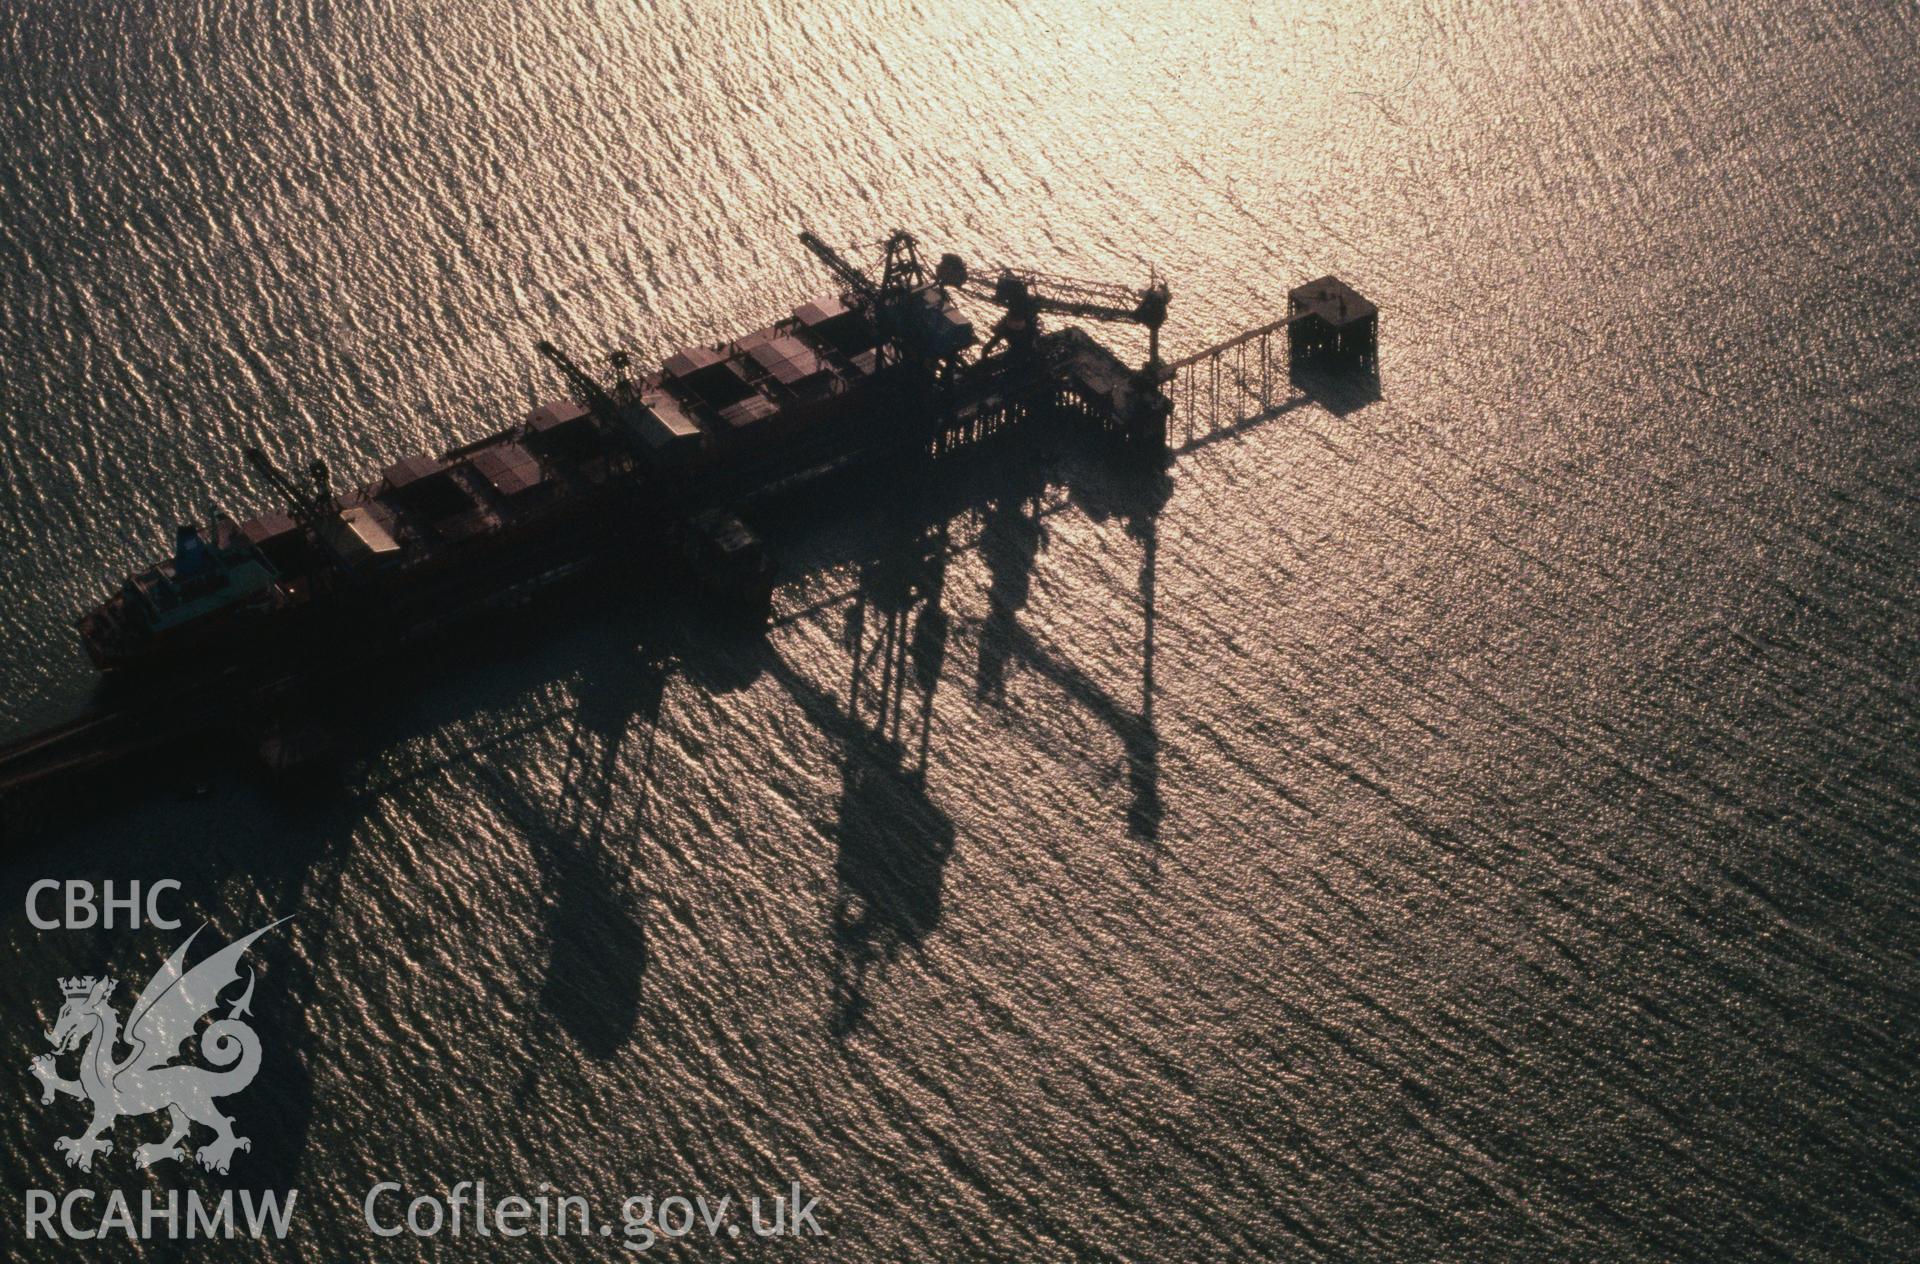 Slide of RCAHMW colour oblique aerial photograph of Port Talbot Docks, taken by C.R. Musson, 12/2/1988.